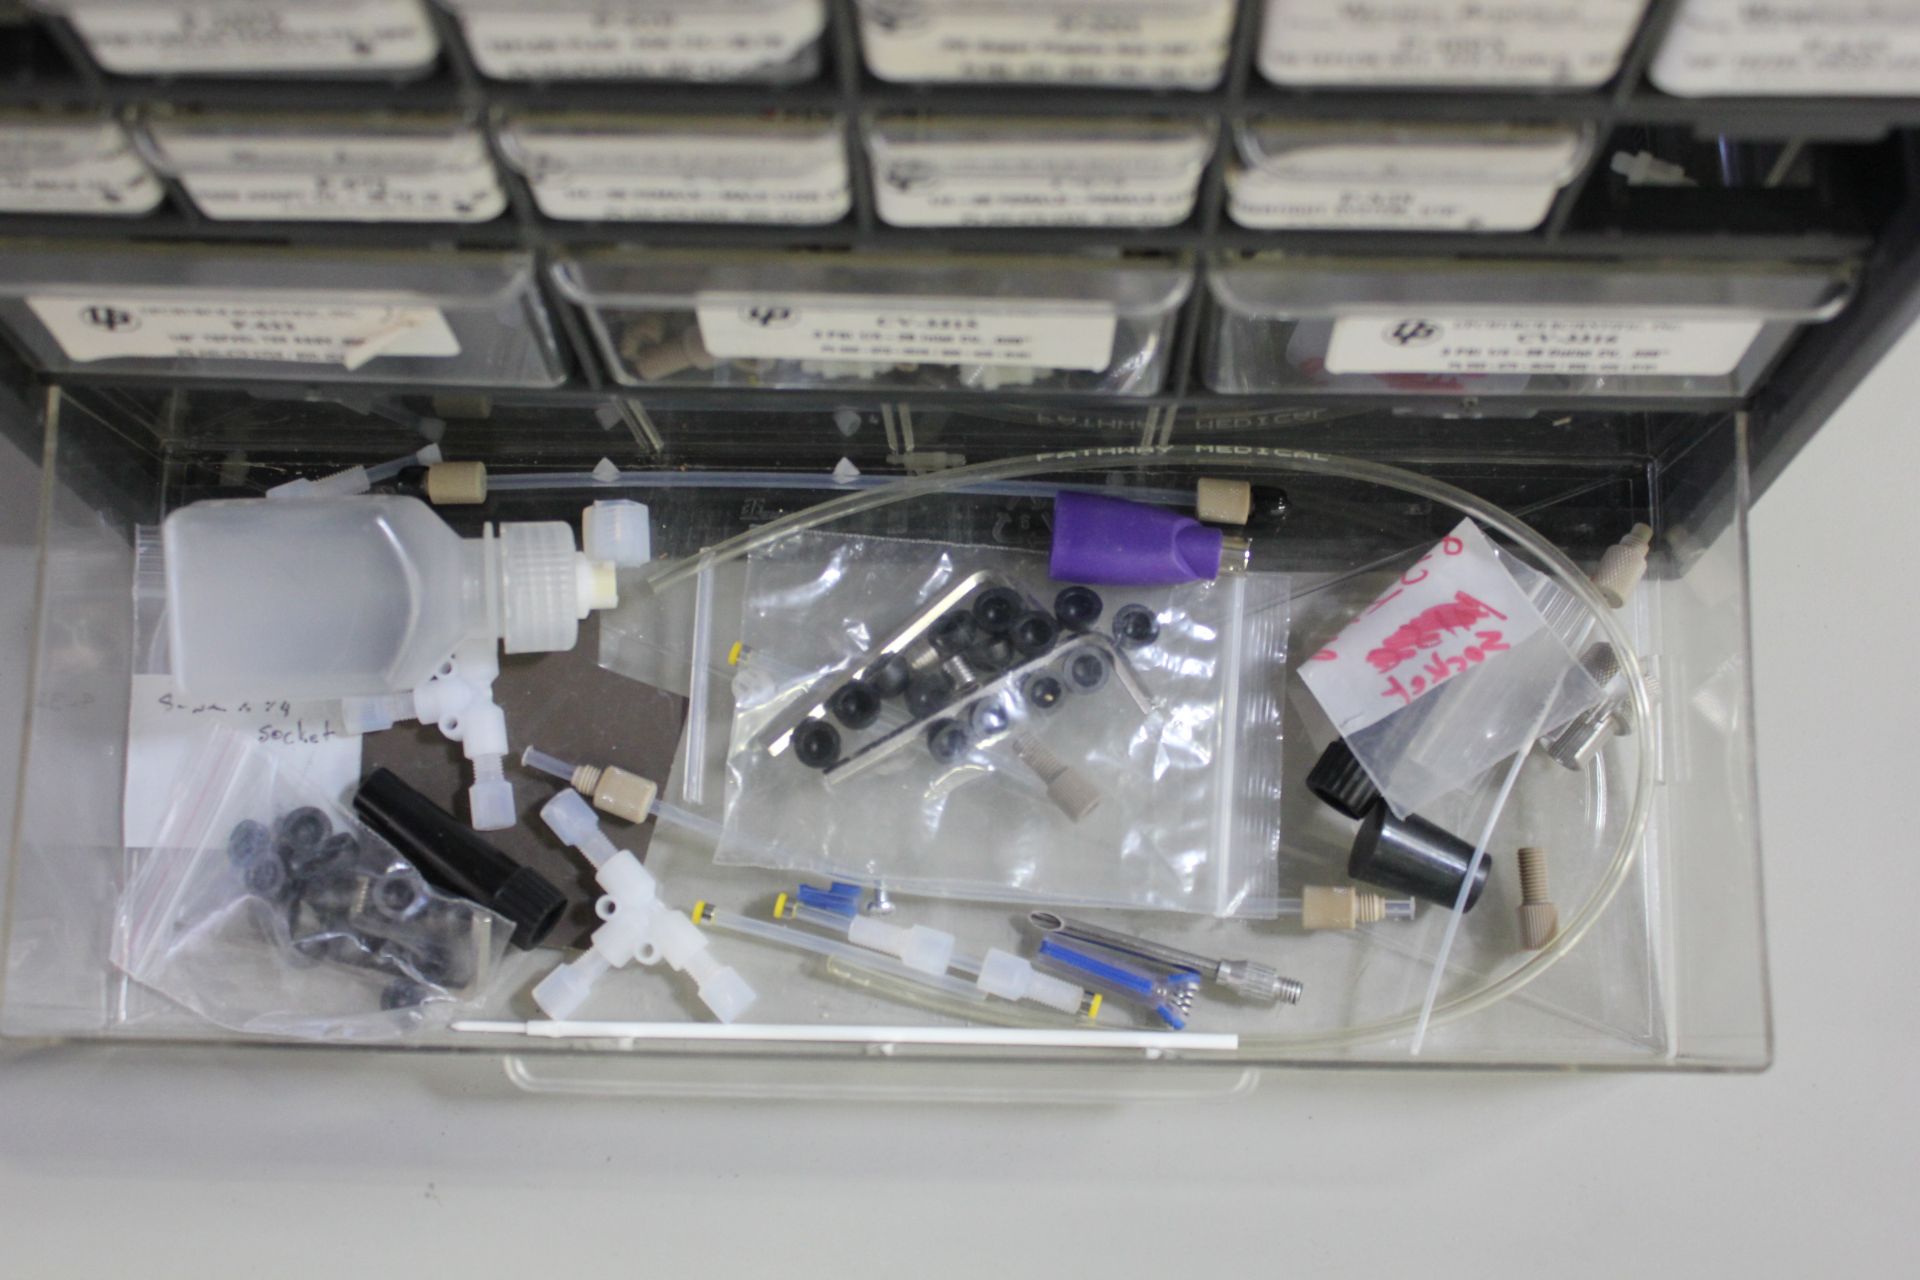 UPCHURCH SCIENTIFIC CABINET WITH HPLC FITTINGS - Image 9 of 12